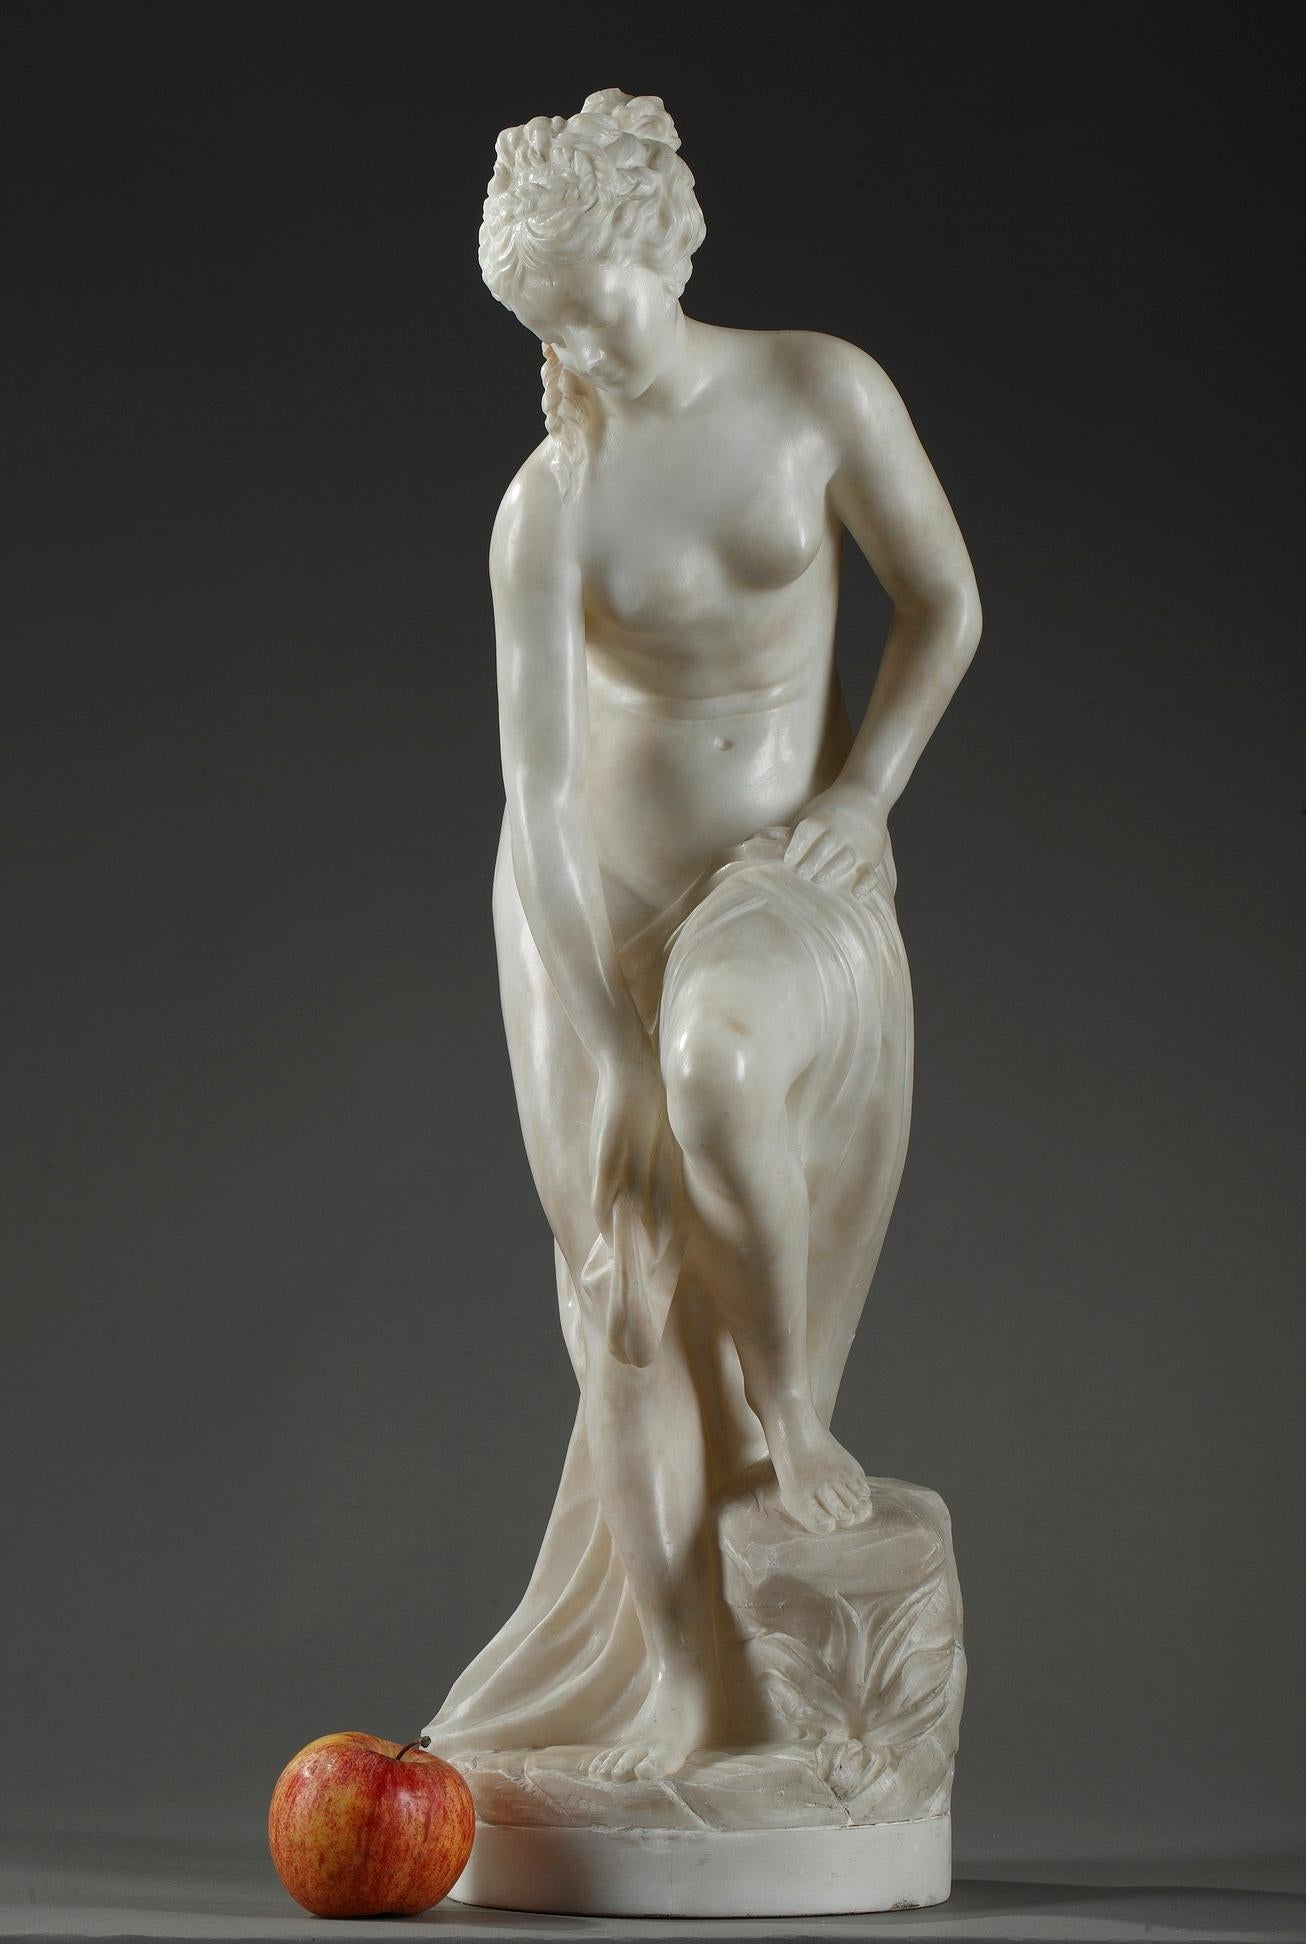 Alabaster statue featuring a nude bather removing the drape around her hips while advancing toward the river. Her light contraposto pose accentuates her feminine curves. Carved of alabaster, the sculpture exhibits neoclassical grace. This enchanting